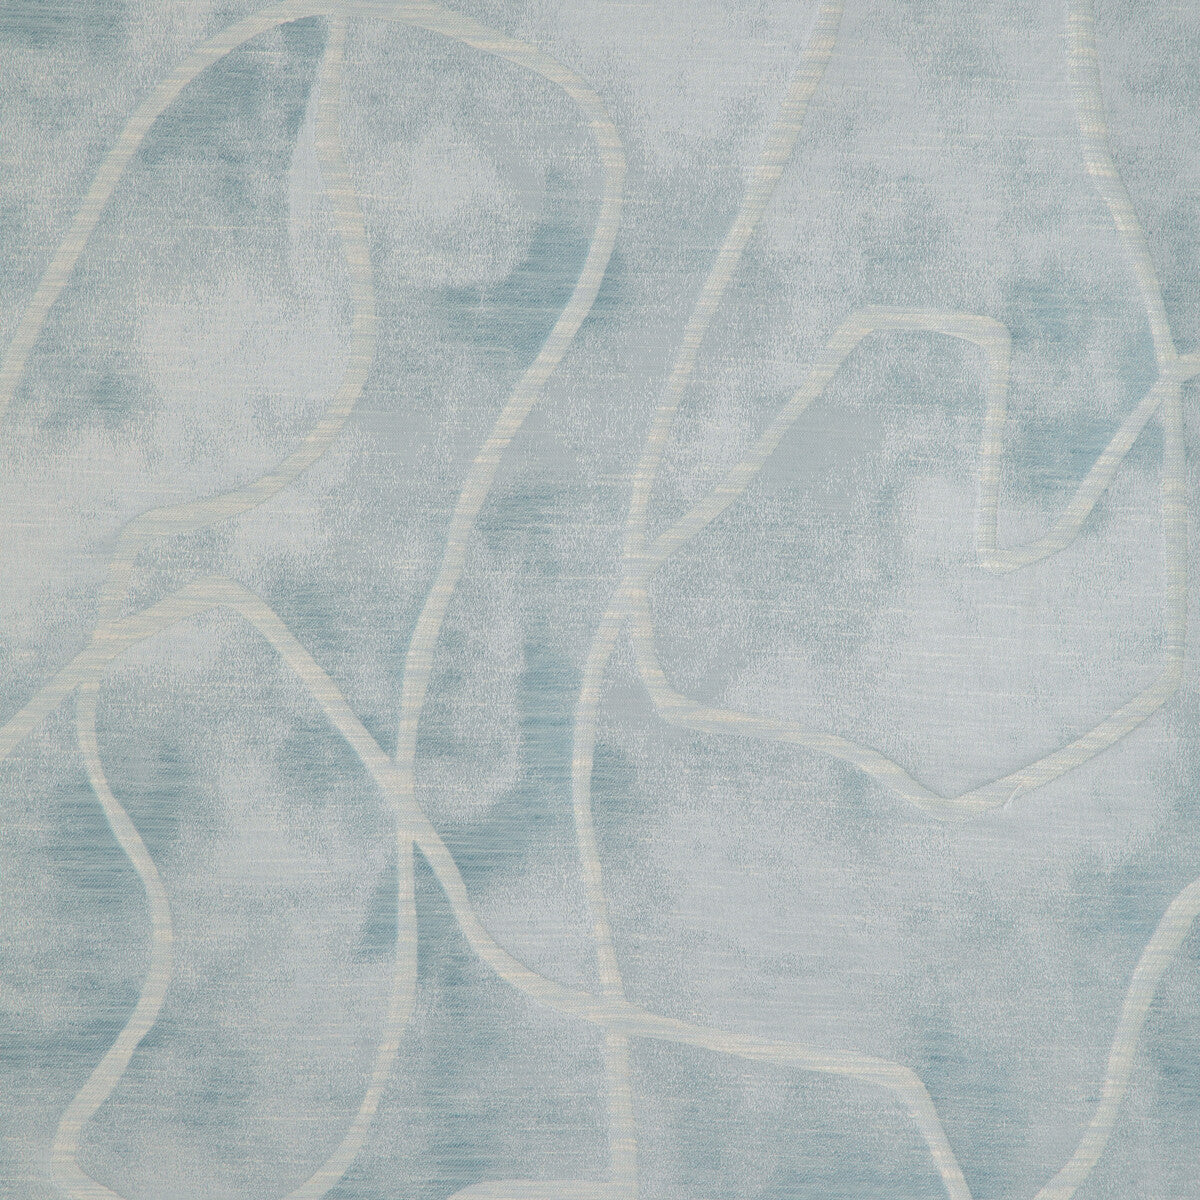 Poetic Motion fabric in seaglass color - pattern 36808.13.0 - by Kravet Design in the Candice Olson collection